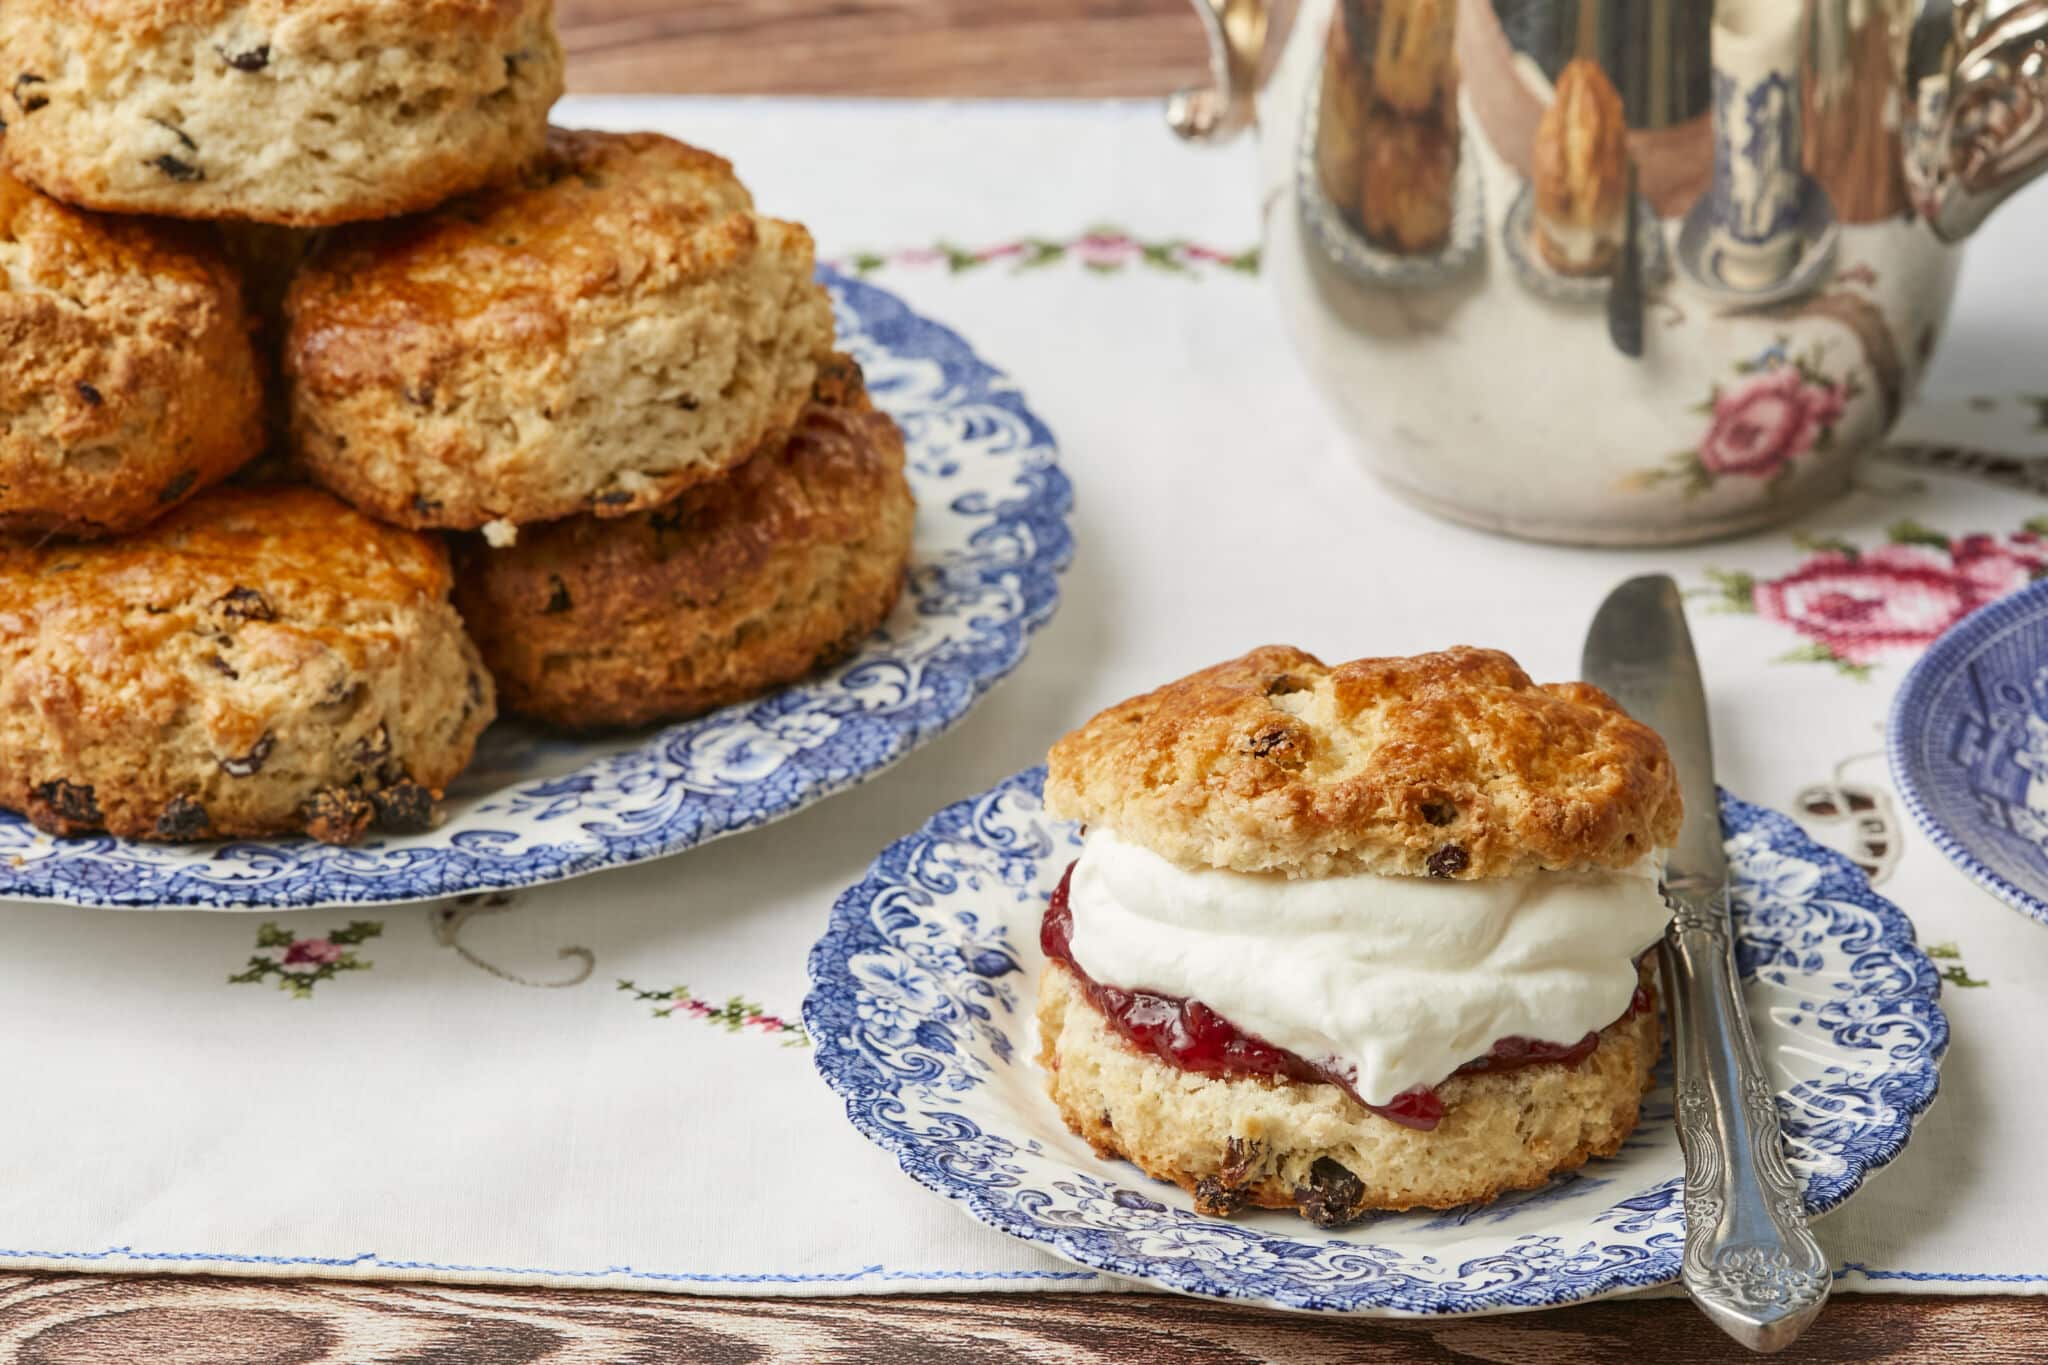 One Irish Scone is served on a floral dessert plate. It is golden brown with a crunchy, crackly exterior and loaded with raisins, stuffed with jam and whipped cream. The rest of the scones are on the big platter.